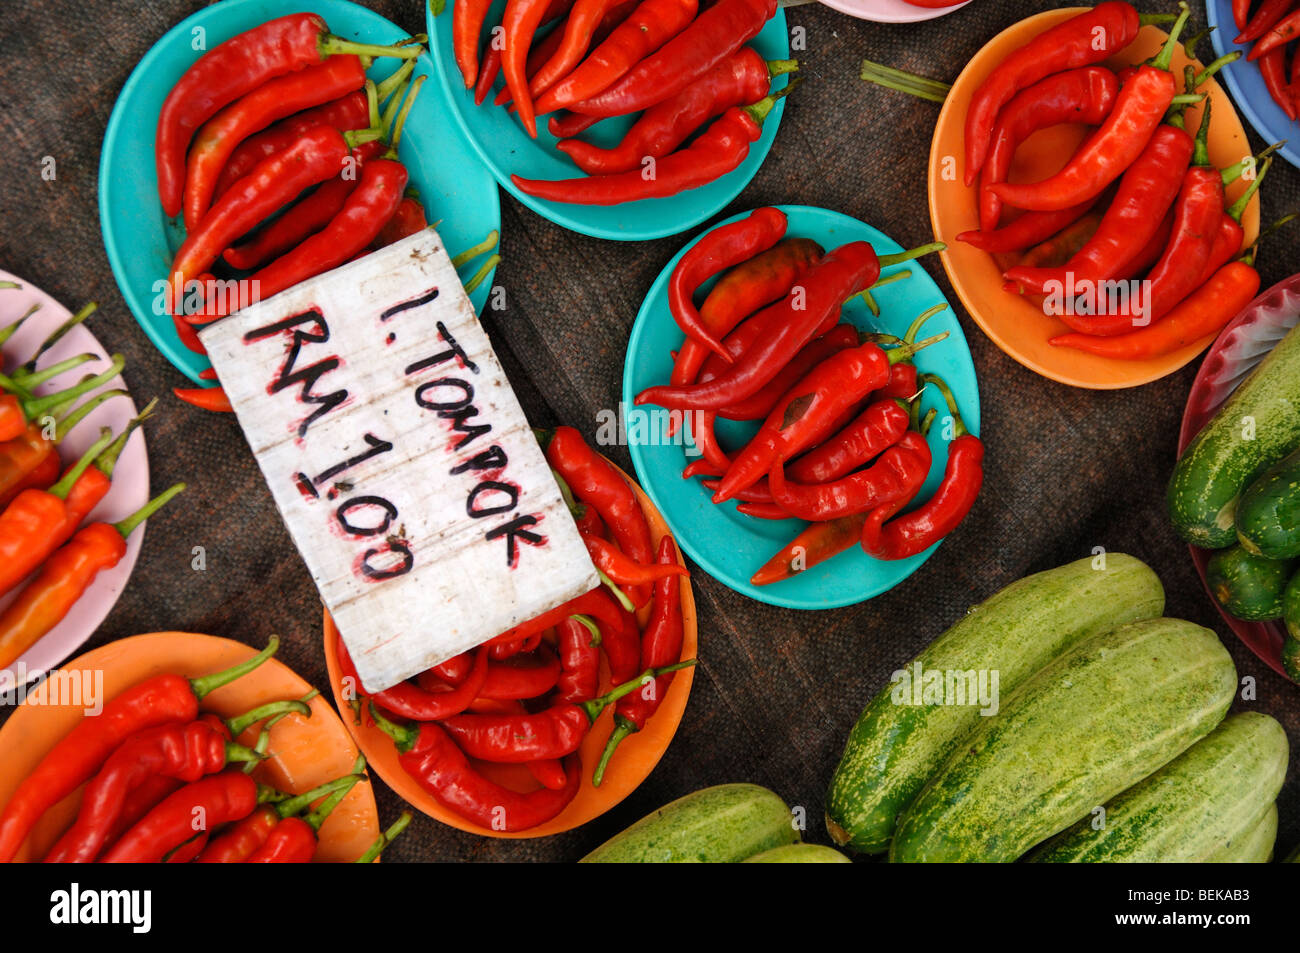 Display of Red Chili or Chilli Peppers on a Vegetable Stall or Market Kuching Sarawak Malaysia Borneo Stock Photo